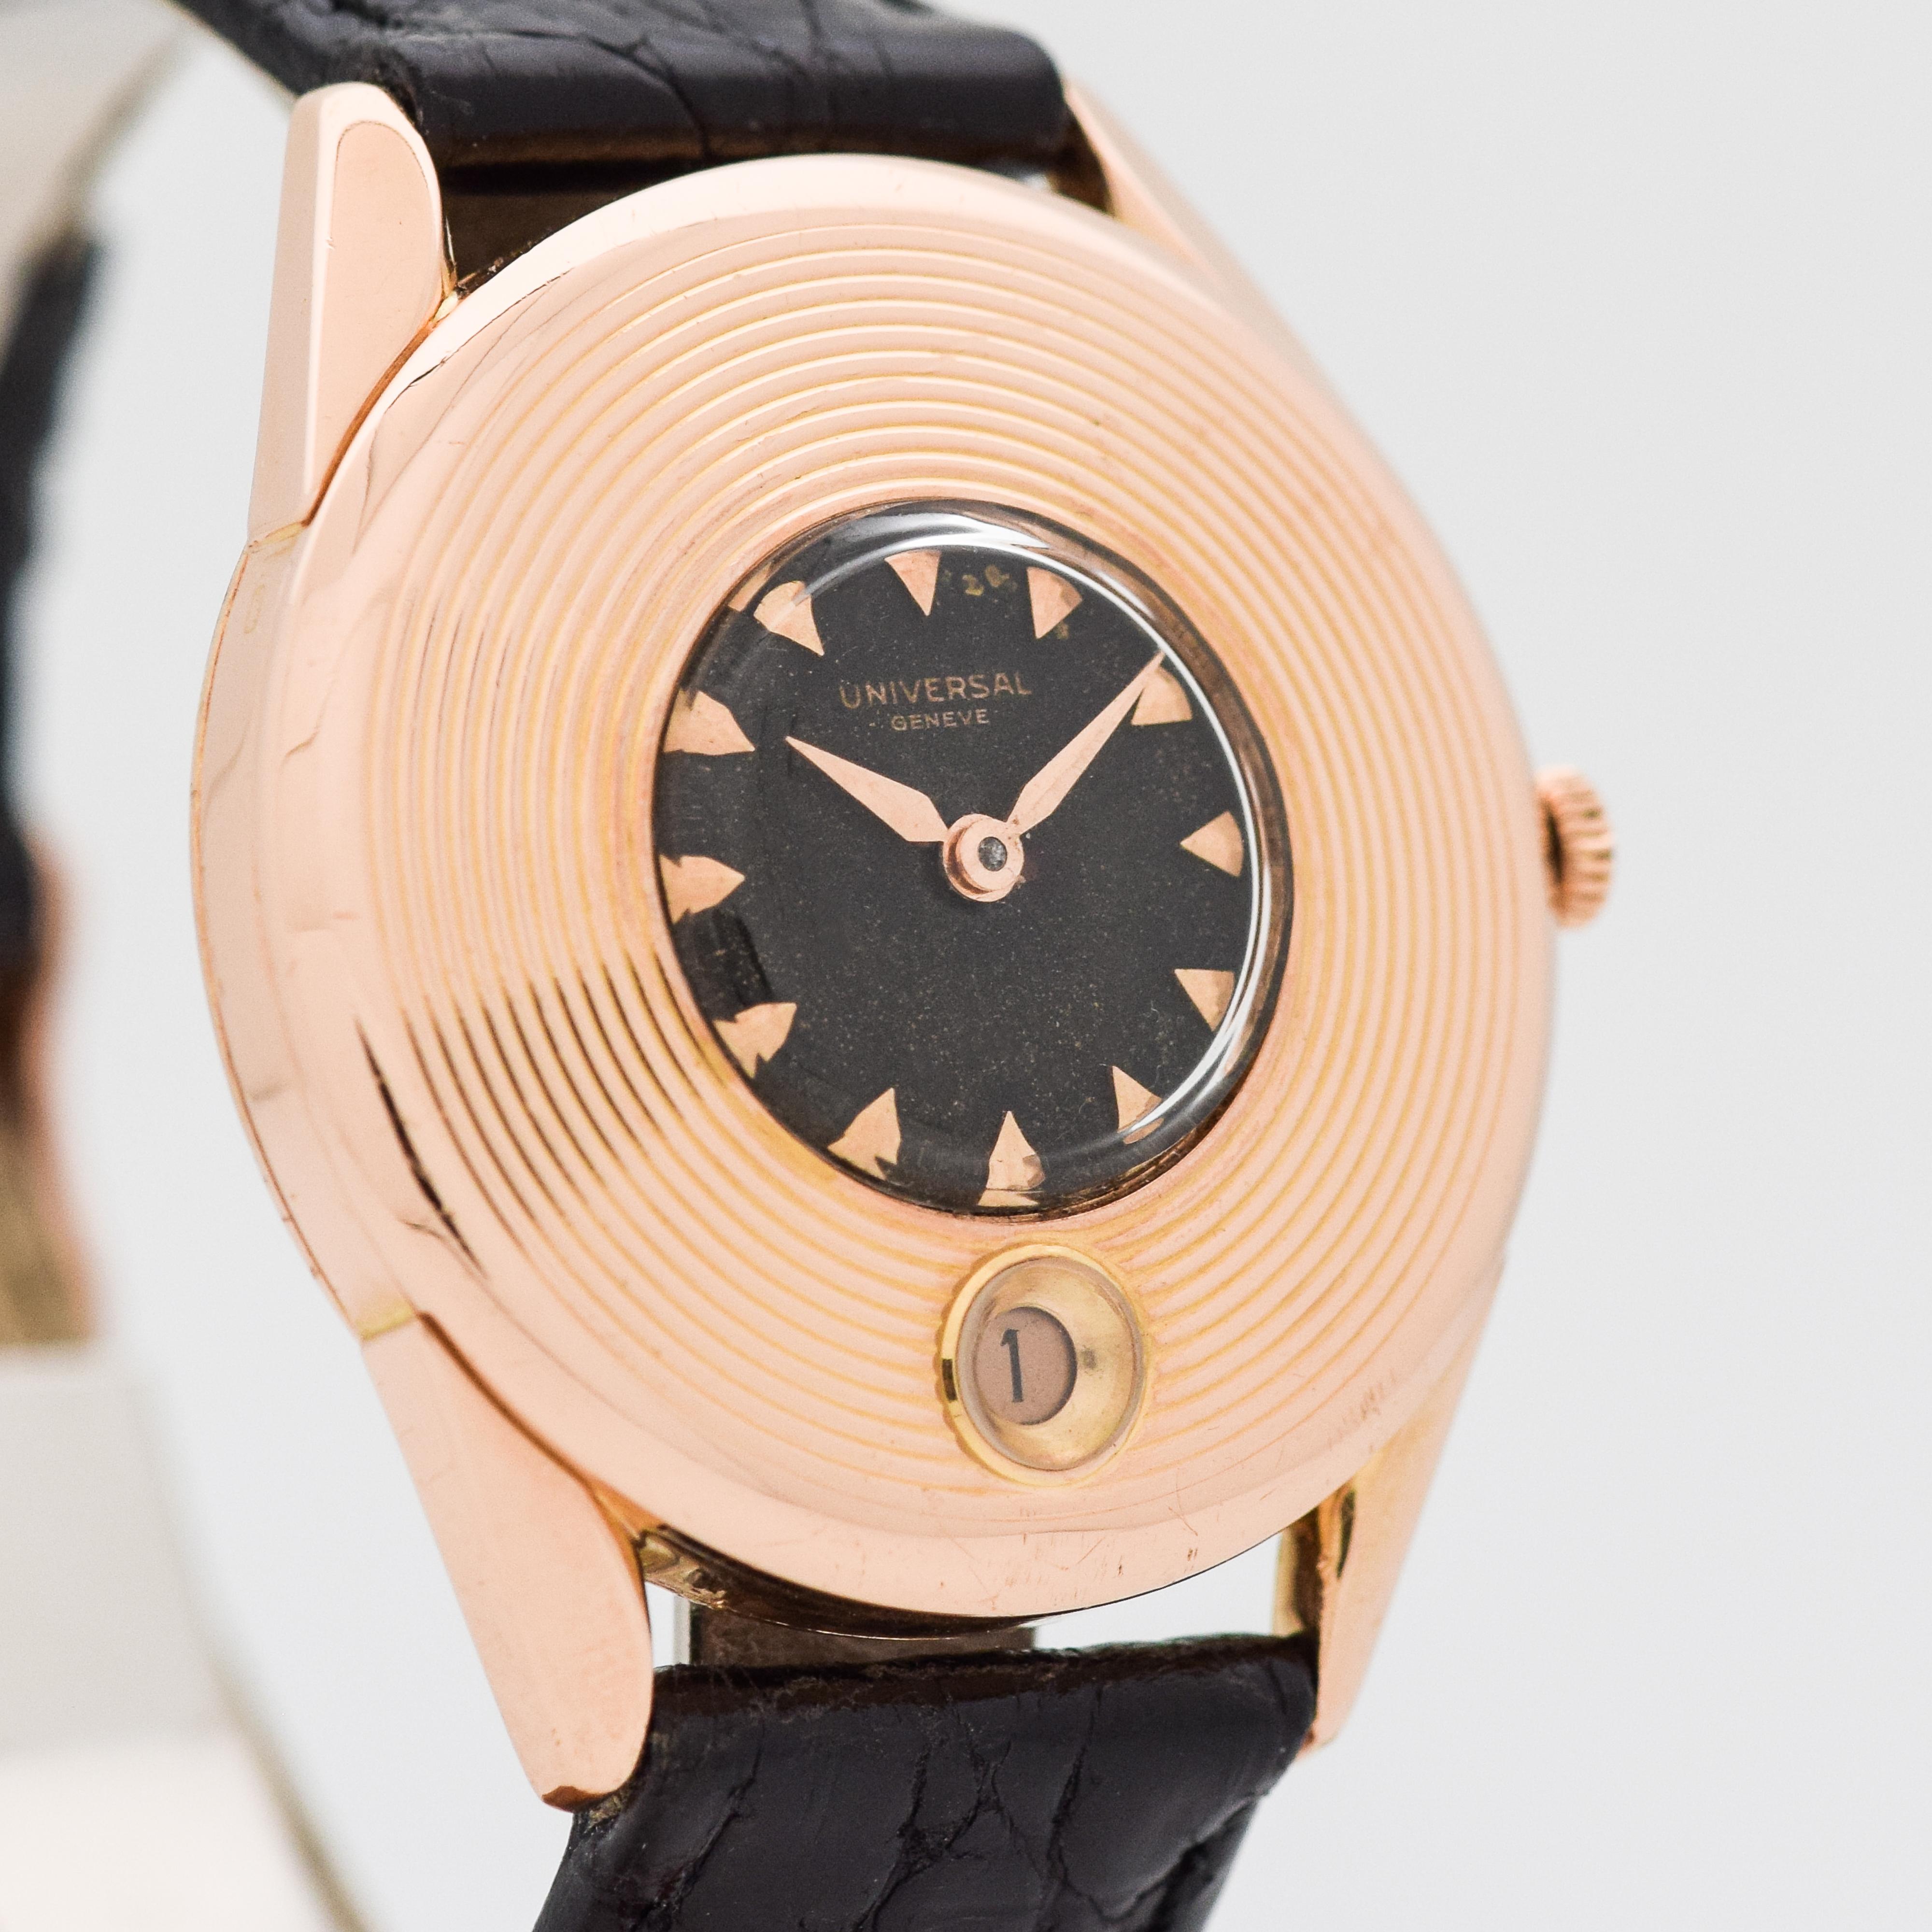 1956 Vintage Universal Geneve 18k Rose Gold Rare Unusual Ridged Bezel Case with Original Black Dial with Applied Beveled Triangle Rose Gold Markers. 34mm x 39mm lug to lug (1.34 in. x 1.54 in.) - 17 jewel, automatic caliber movement. Triple Signed.